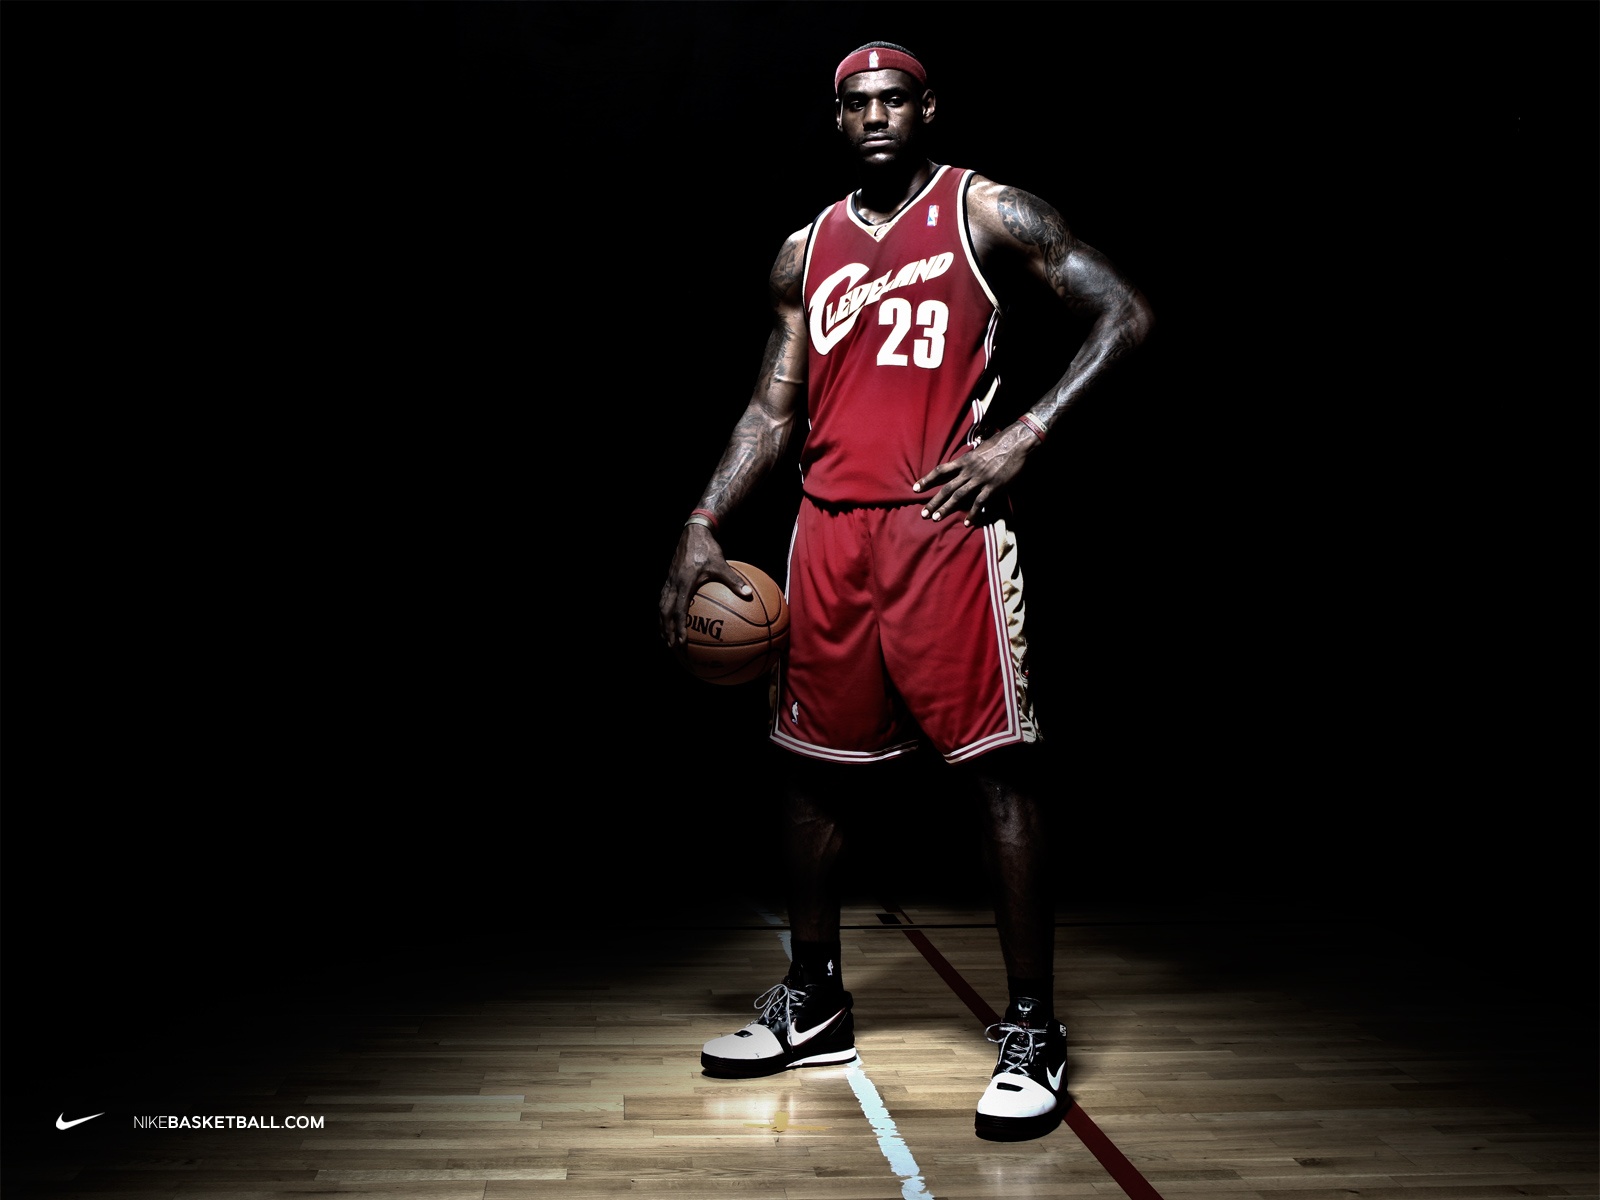 Lebron James Miami Heat Wallpapers Wallpapers Backgrounds Images 1600x1200